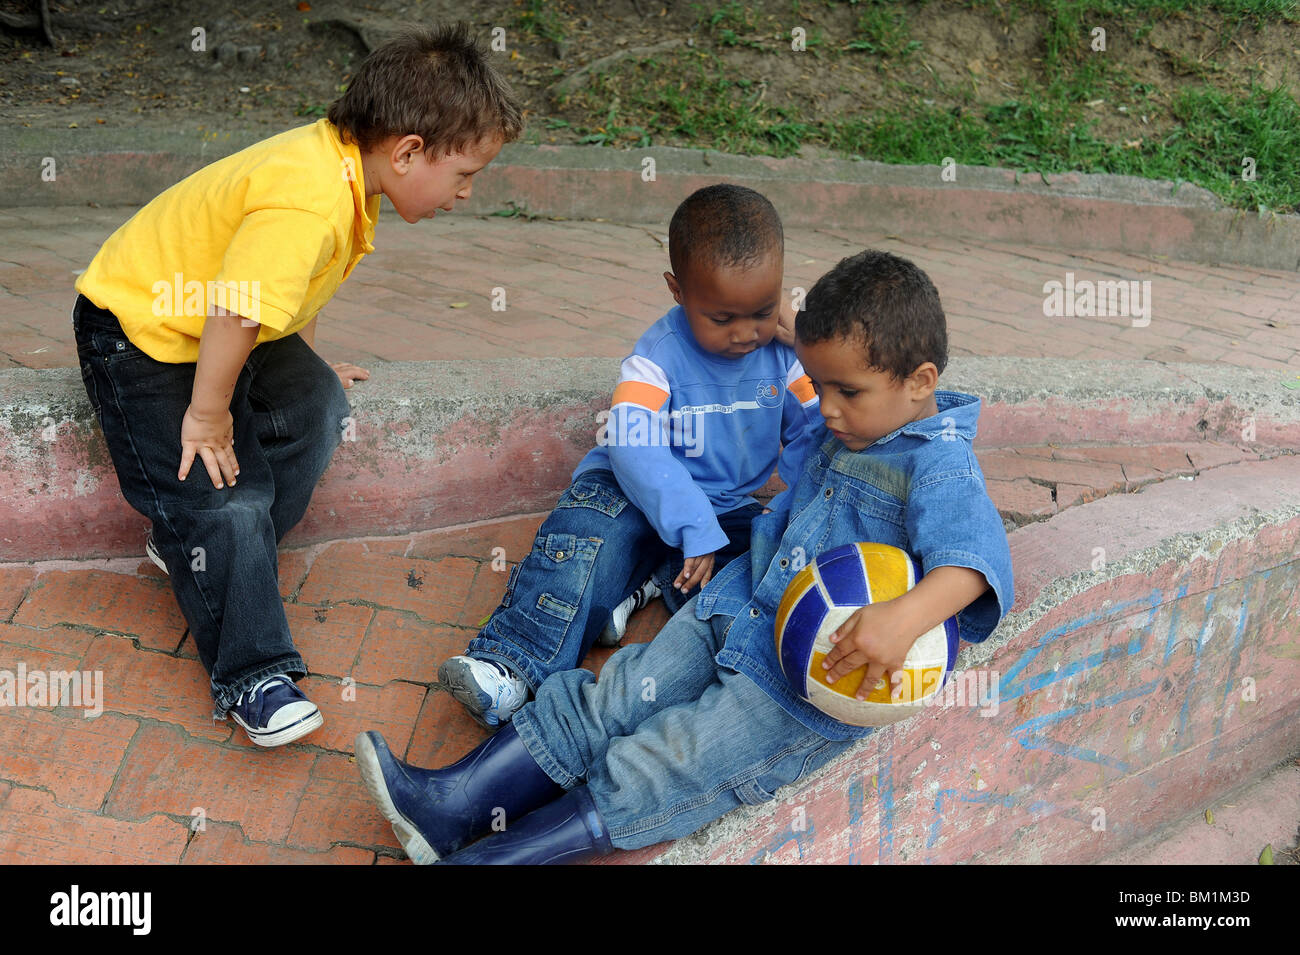 3 boys 3-4 years playing in park in Medellin. Stock Photo